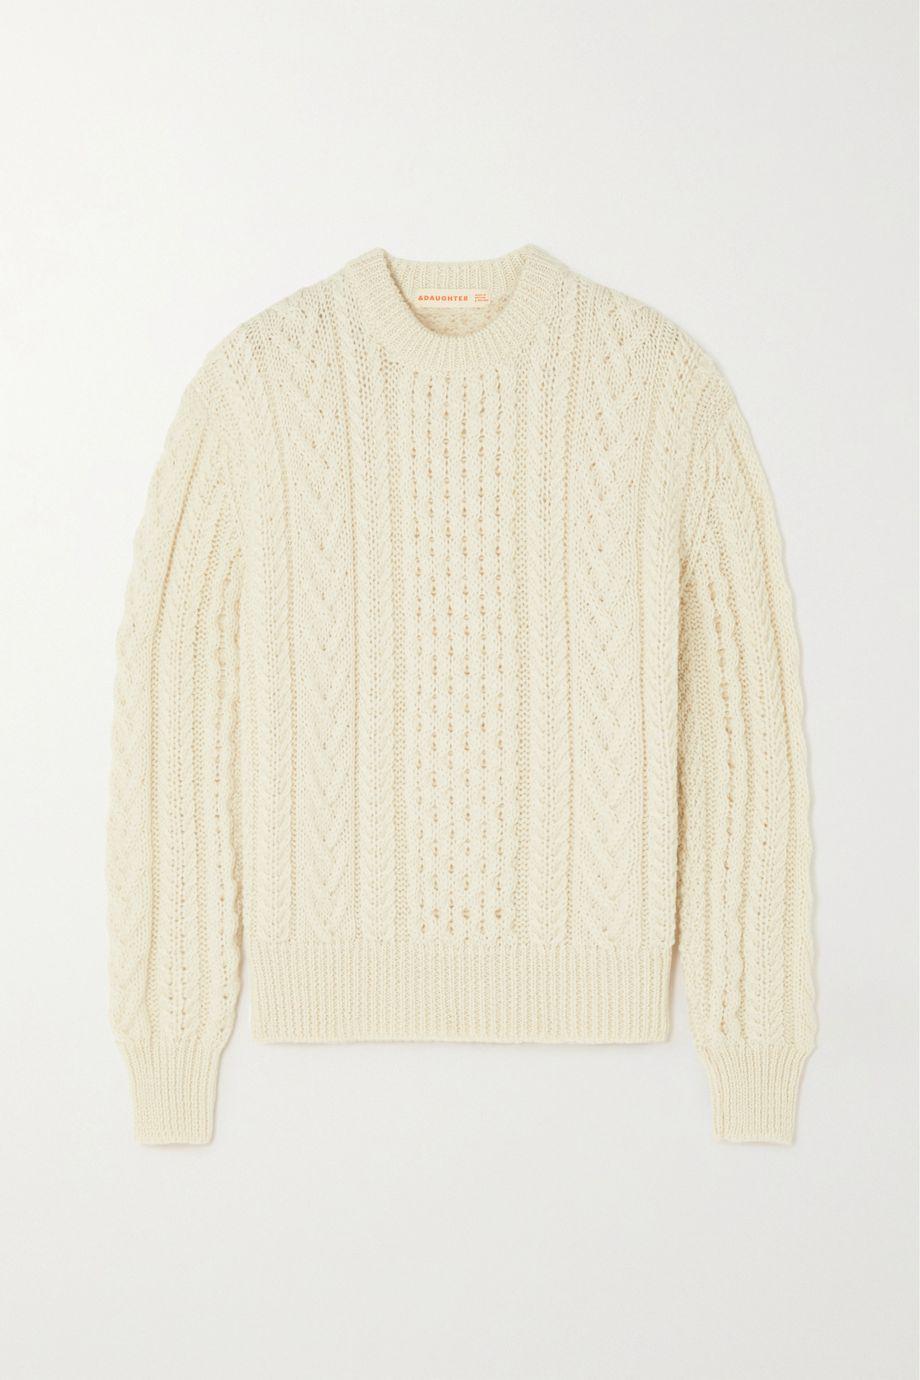 Aran cable-knit wool sweater by &DAUGHTER